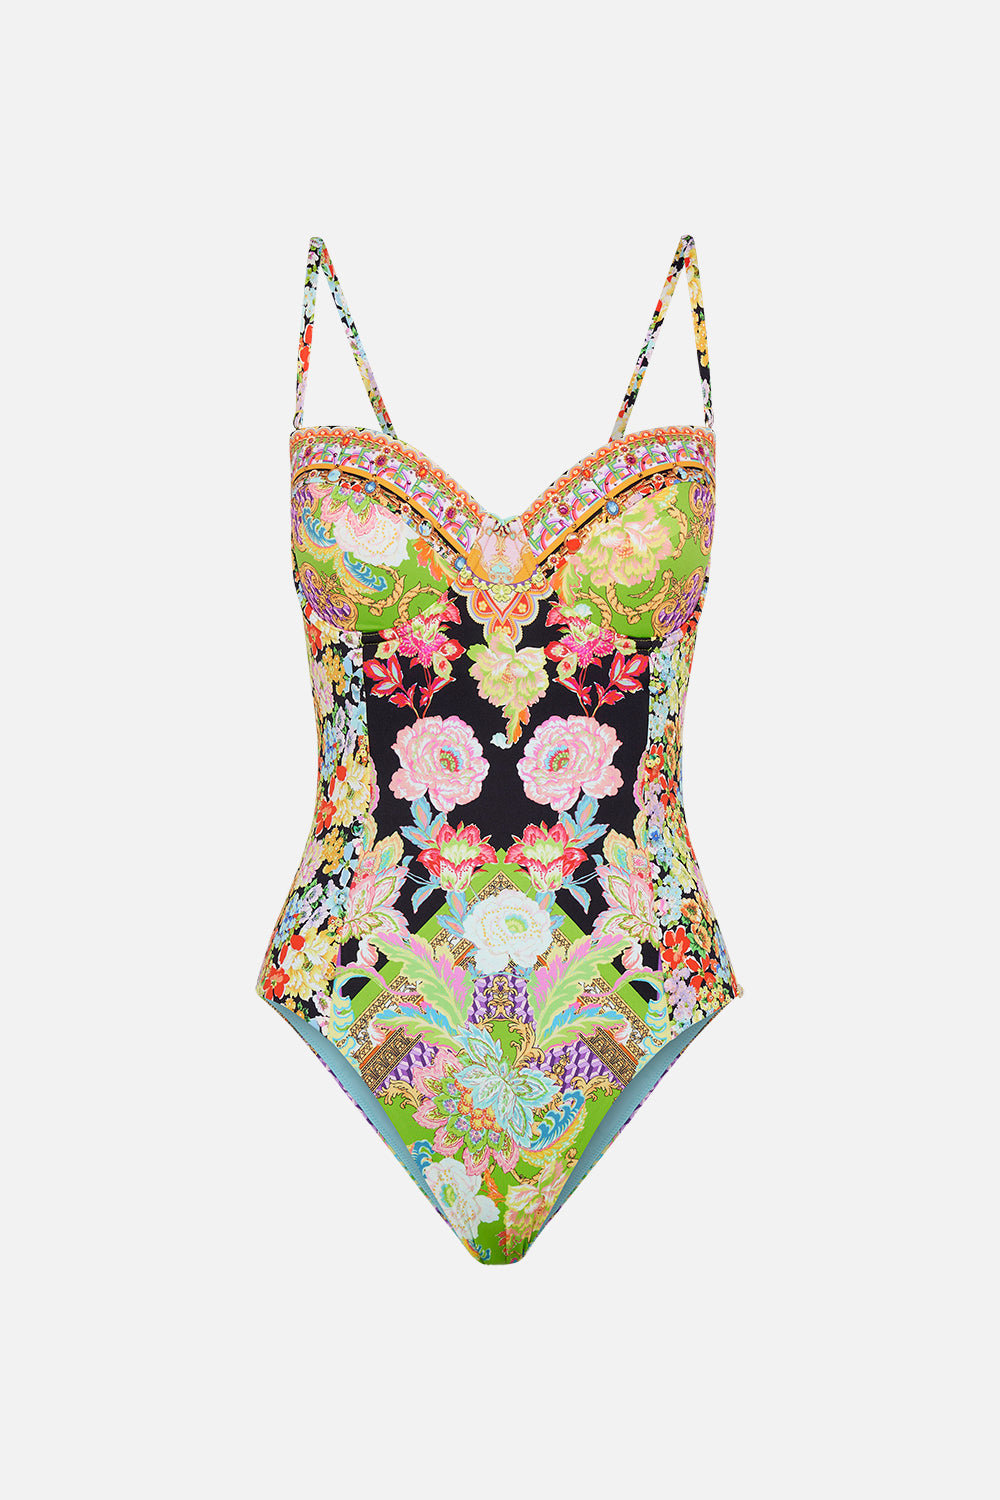 Product view of CAMILLA swimwear one piece swimsuit in Sundowners in Sicily print 